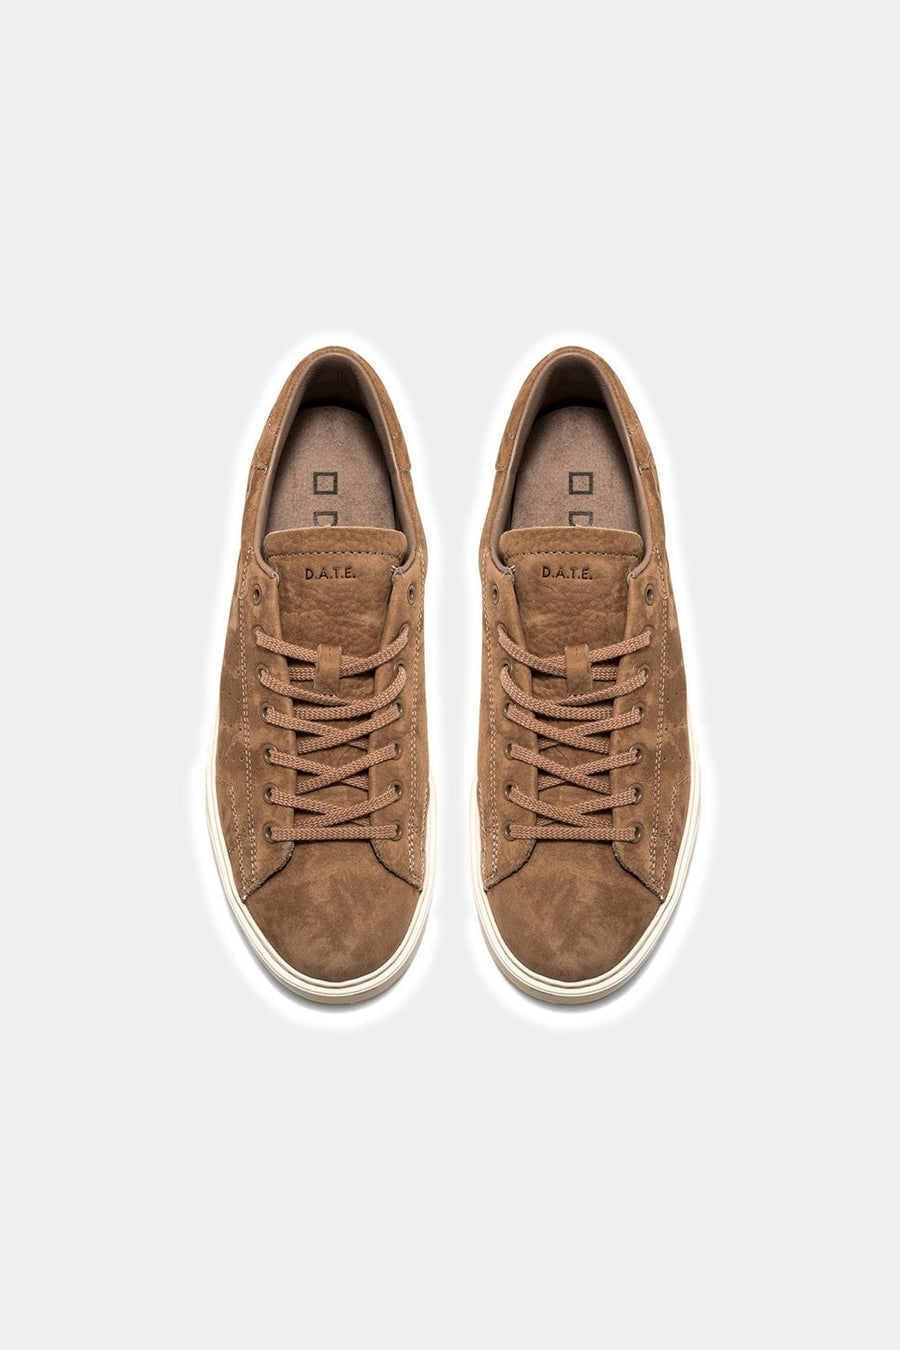 Buy the D.A.T.E. Levante Nubuk Sneaker in Taupe at Intro. Spend £50 for free UK delivery. Official stockists. We ship worldwide.